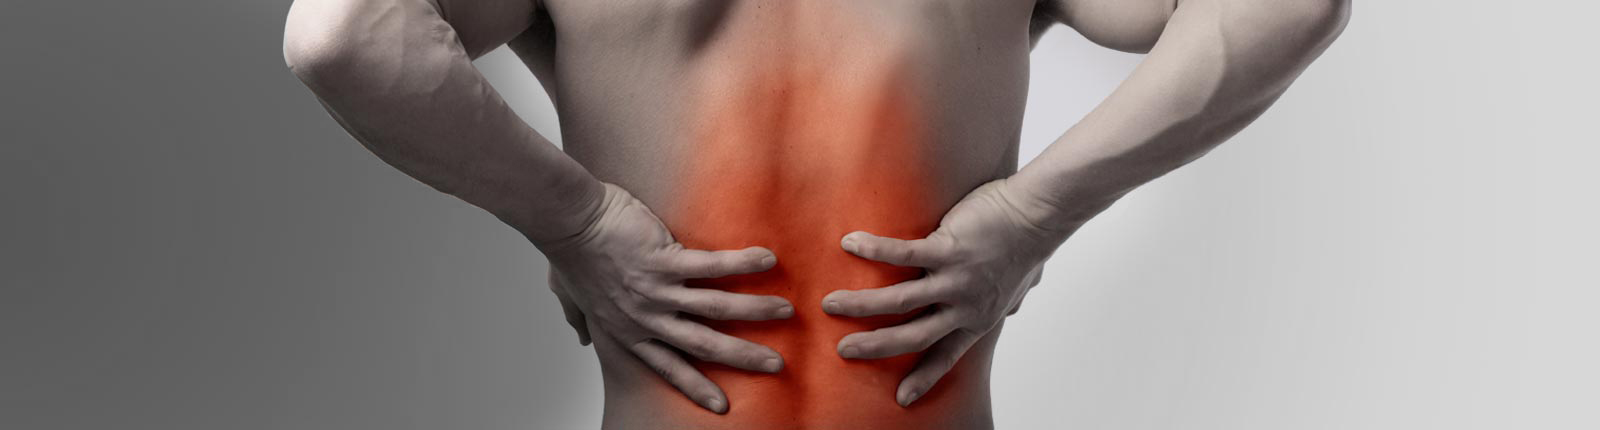 Chiropractic for Low Back Pain